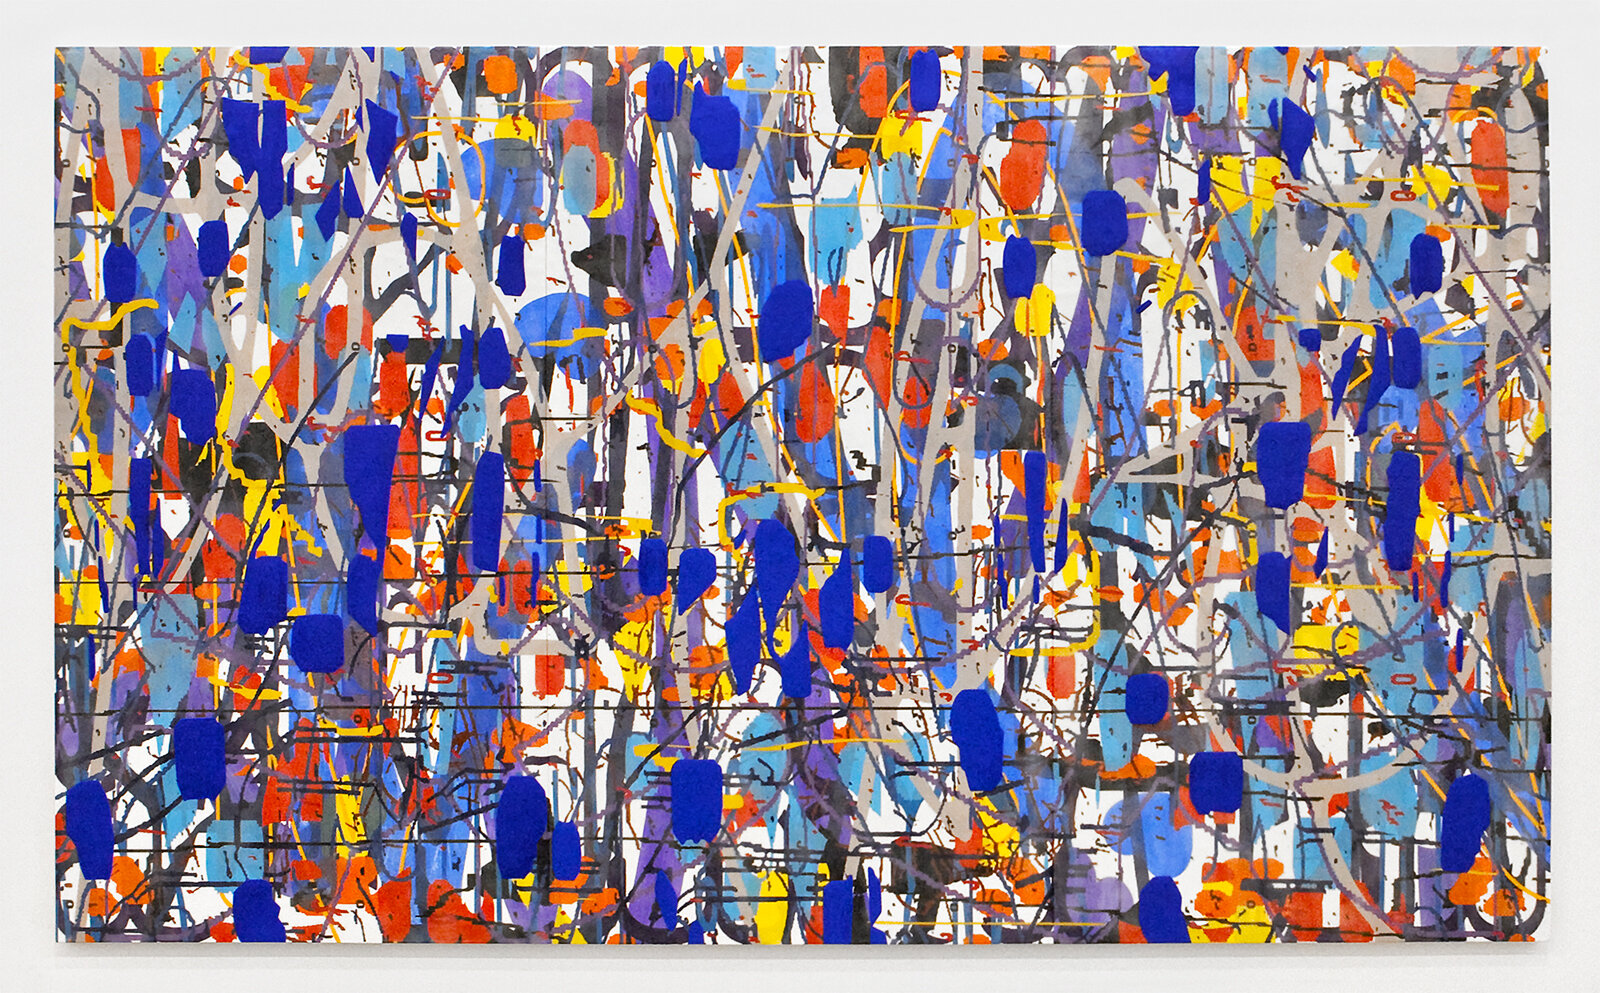   Variation (blue, red, violet),  2019 Oil and encaustic on three panels 72 x 120 inches Corporate collection, Washington, D.C.  